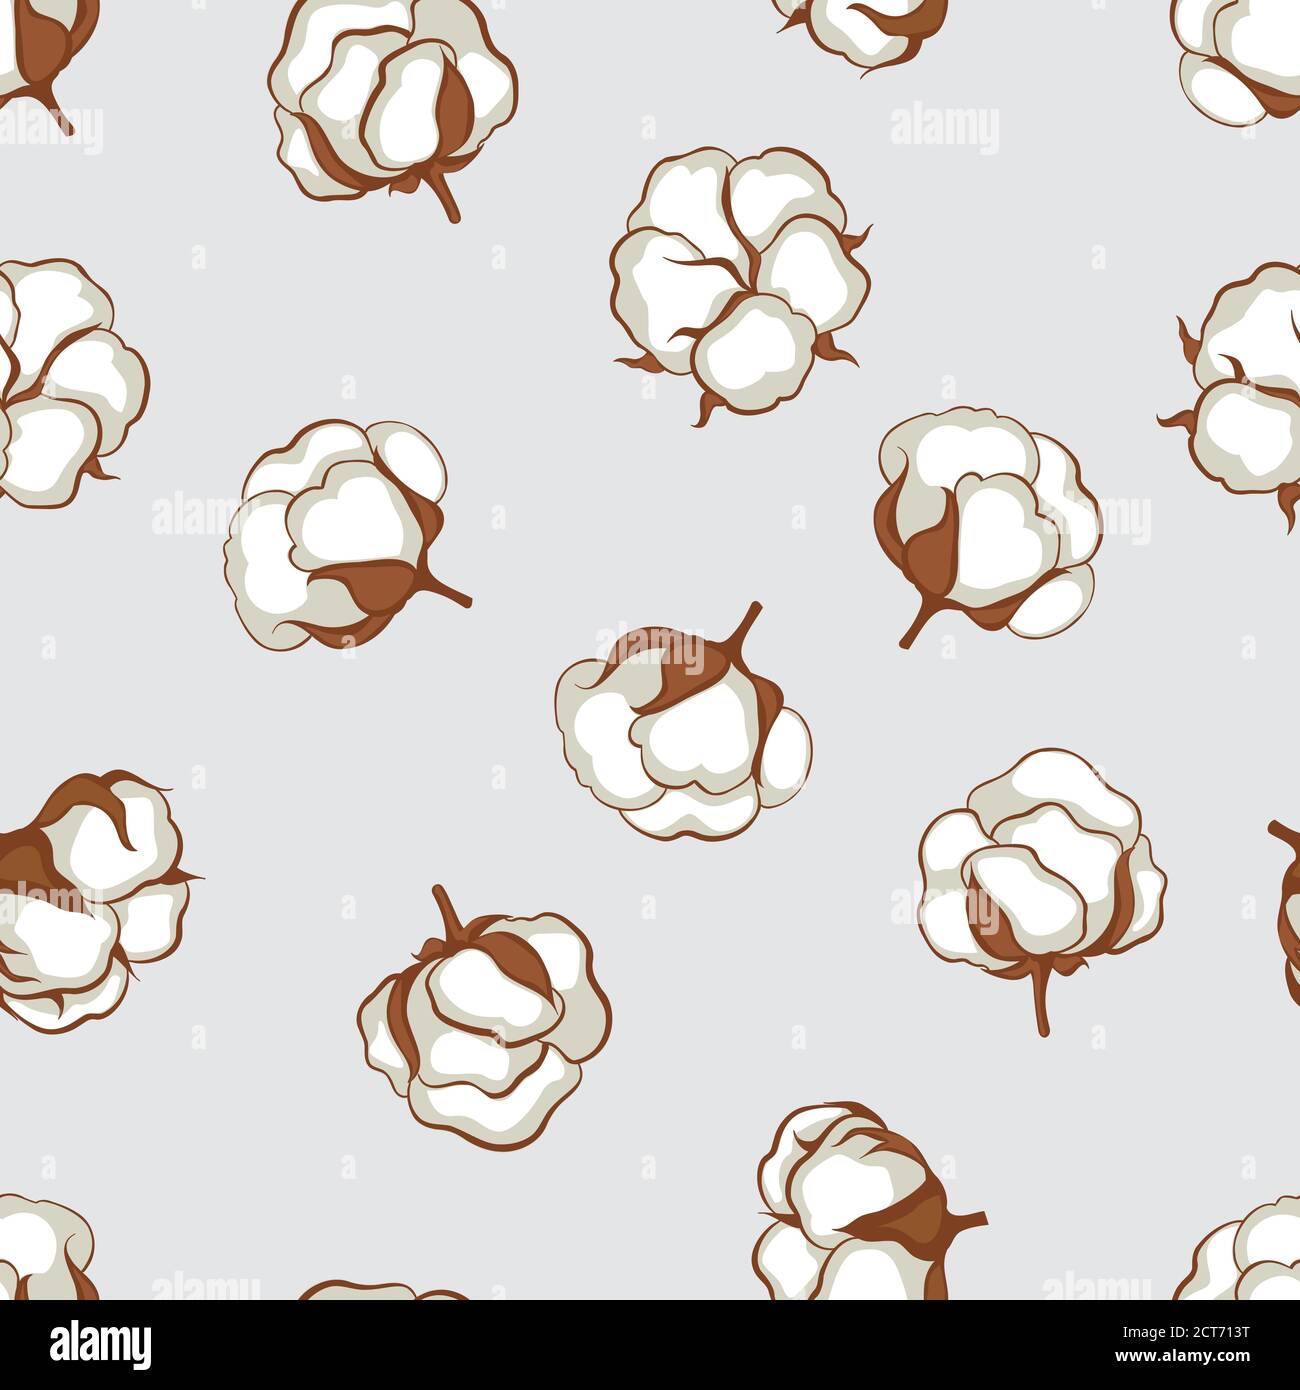 Seamless pattern with cotton balls Royalty Free Vector Image